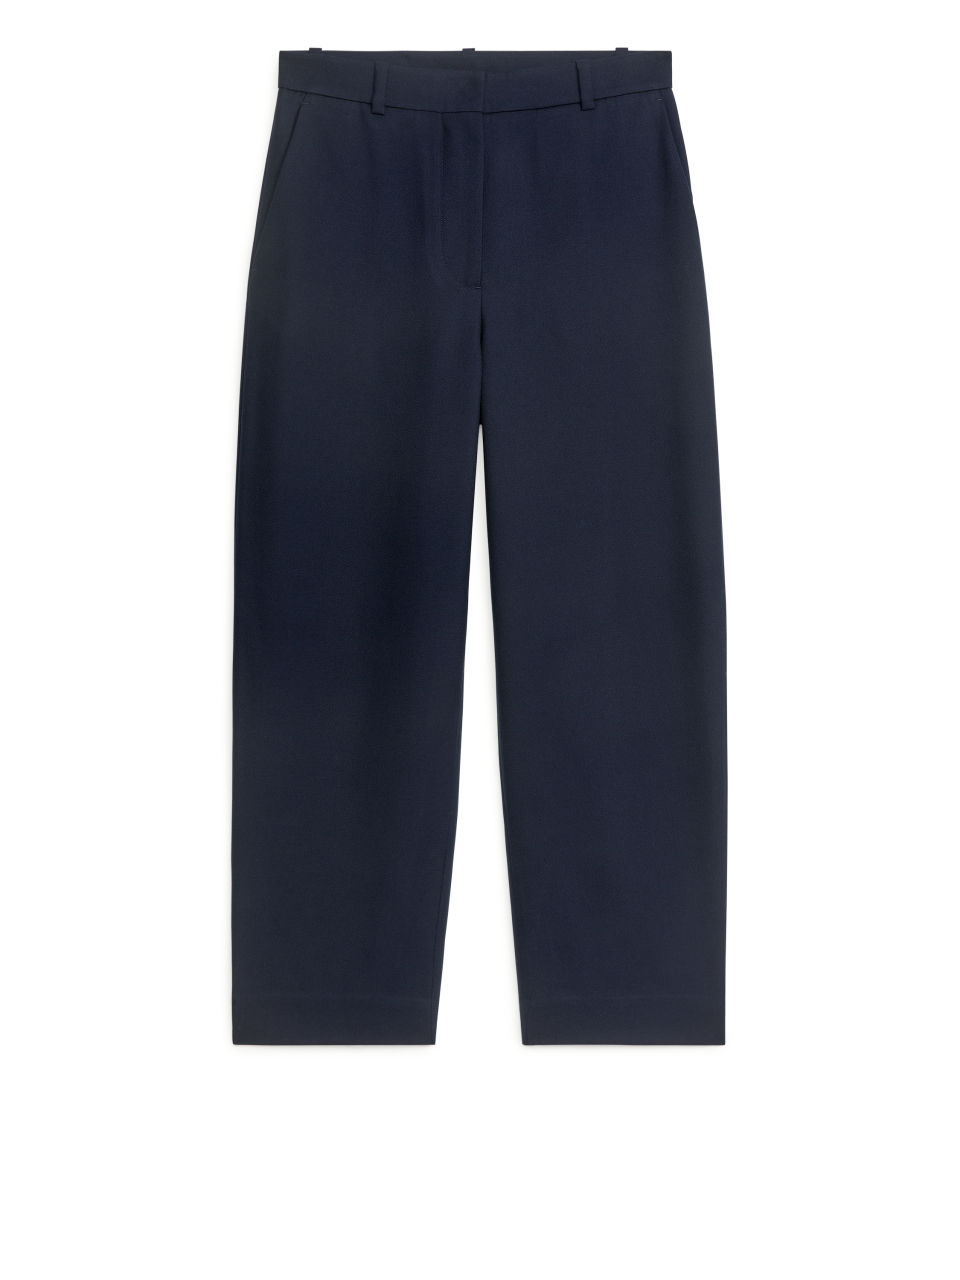 Arket Cropped Suit Trousers